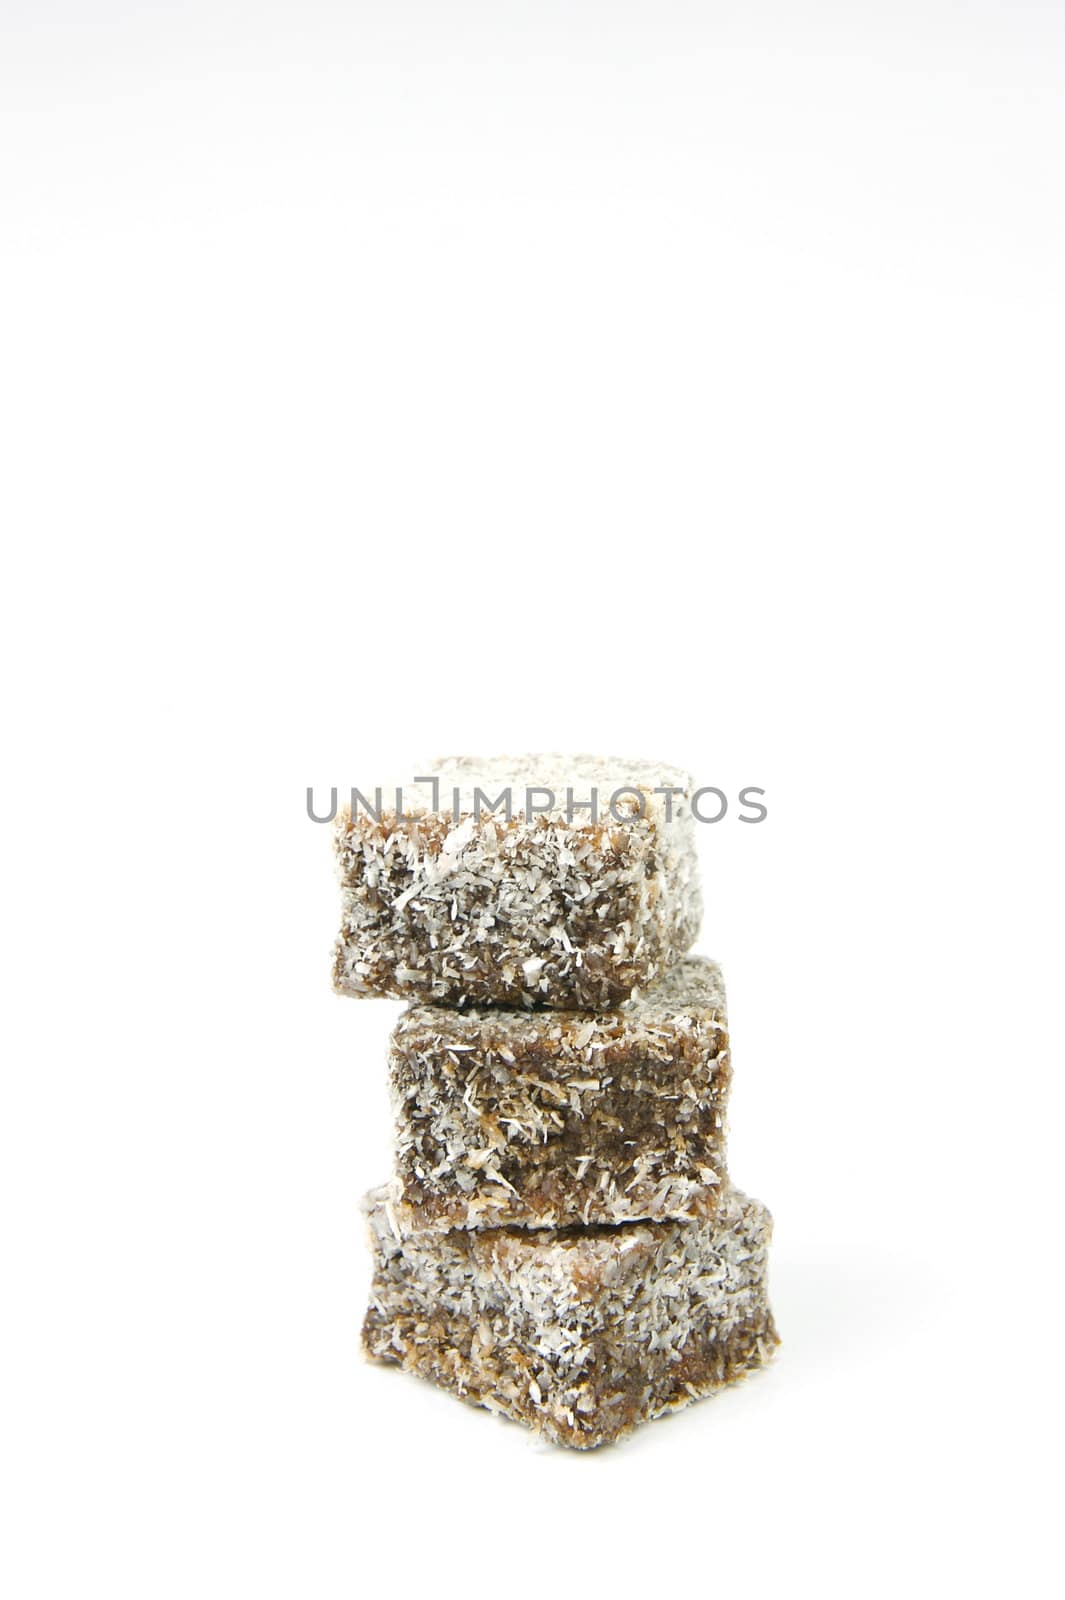 Lamingtons isolated against a white background